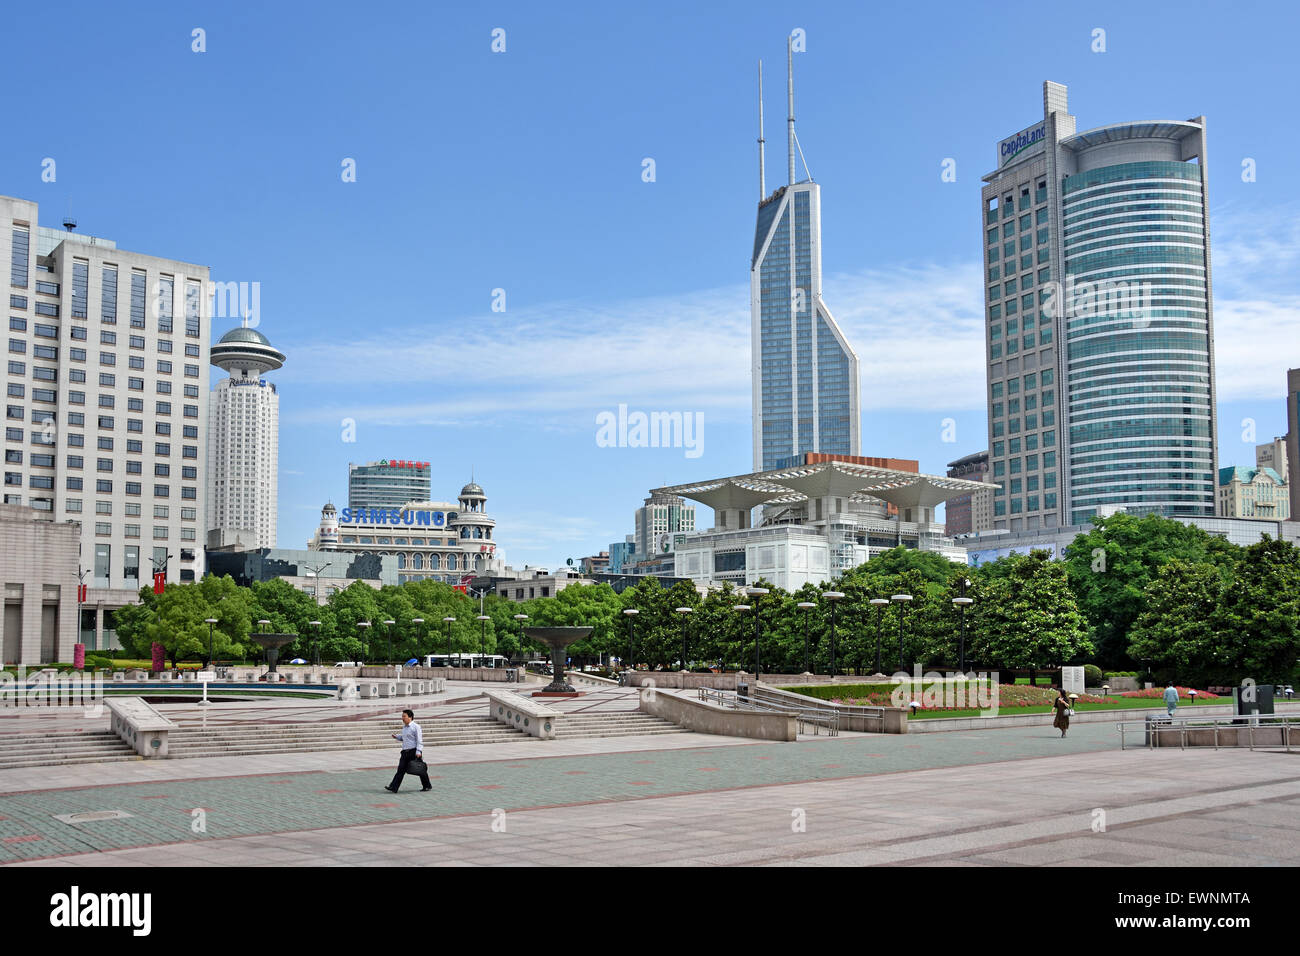 Fountain with people and children, People's Square, Municipal Government Building, Shanghai Municipality ,China skyline city Stock Photo